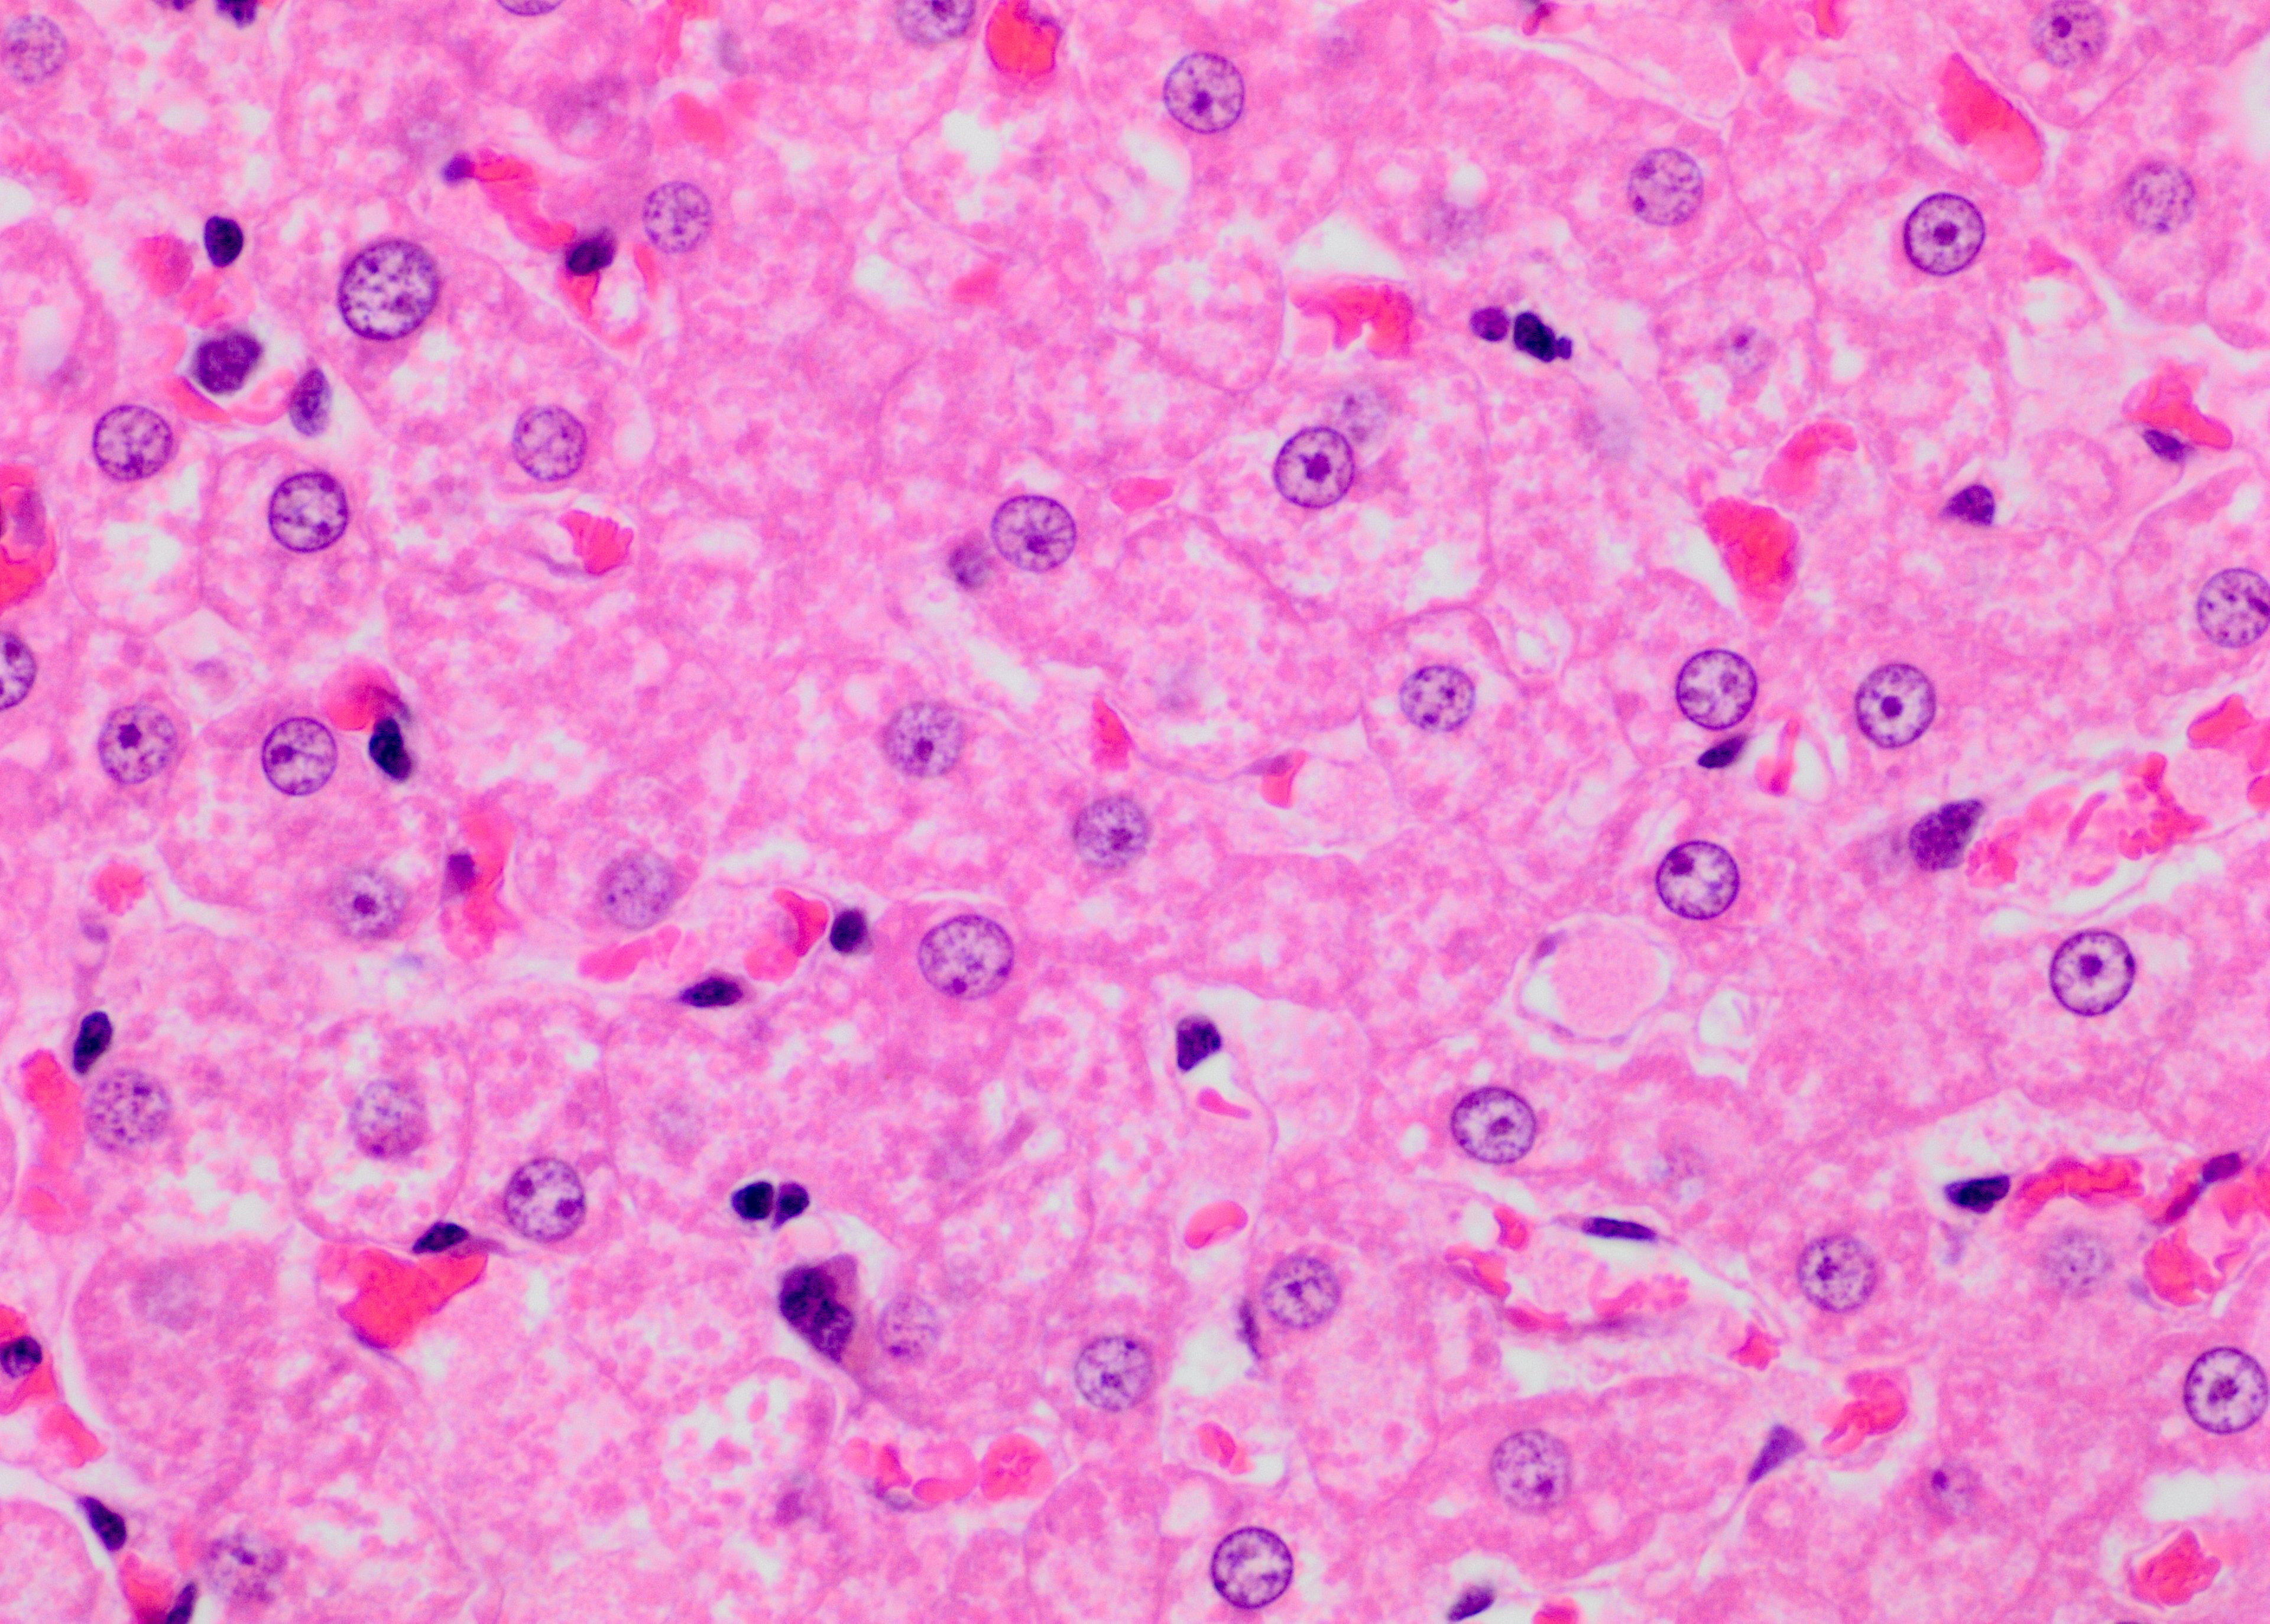 Liver Cell